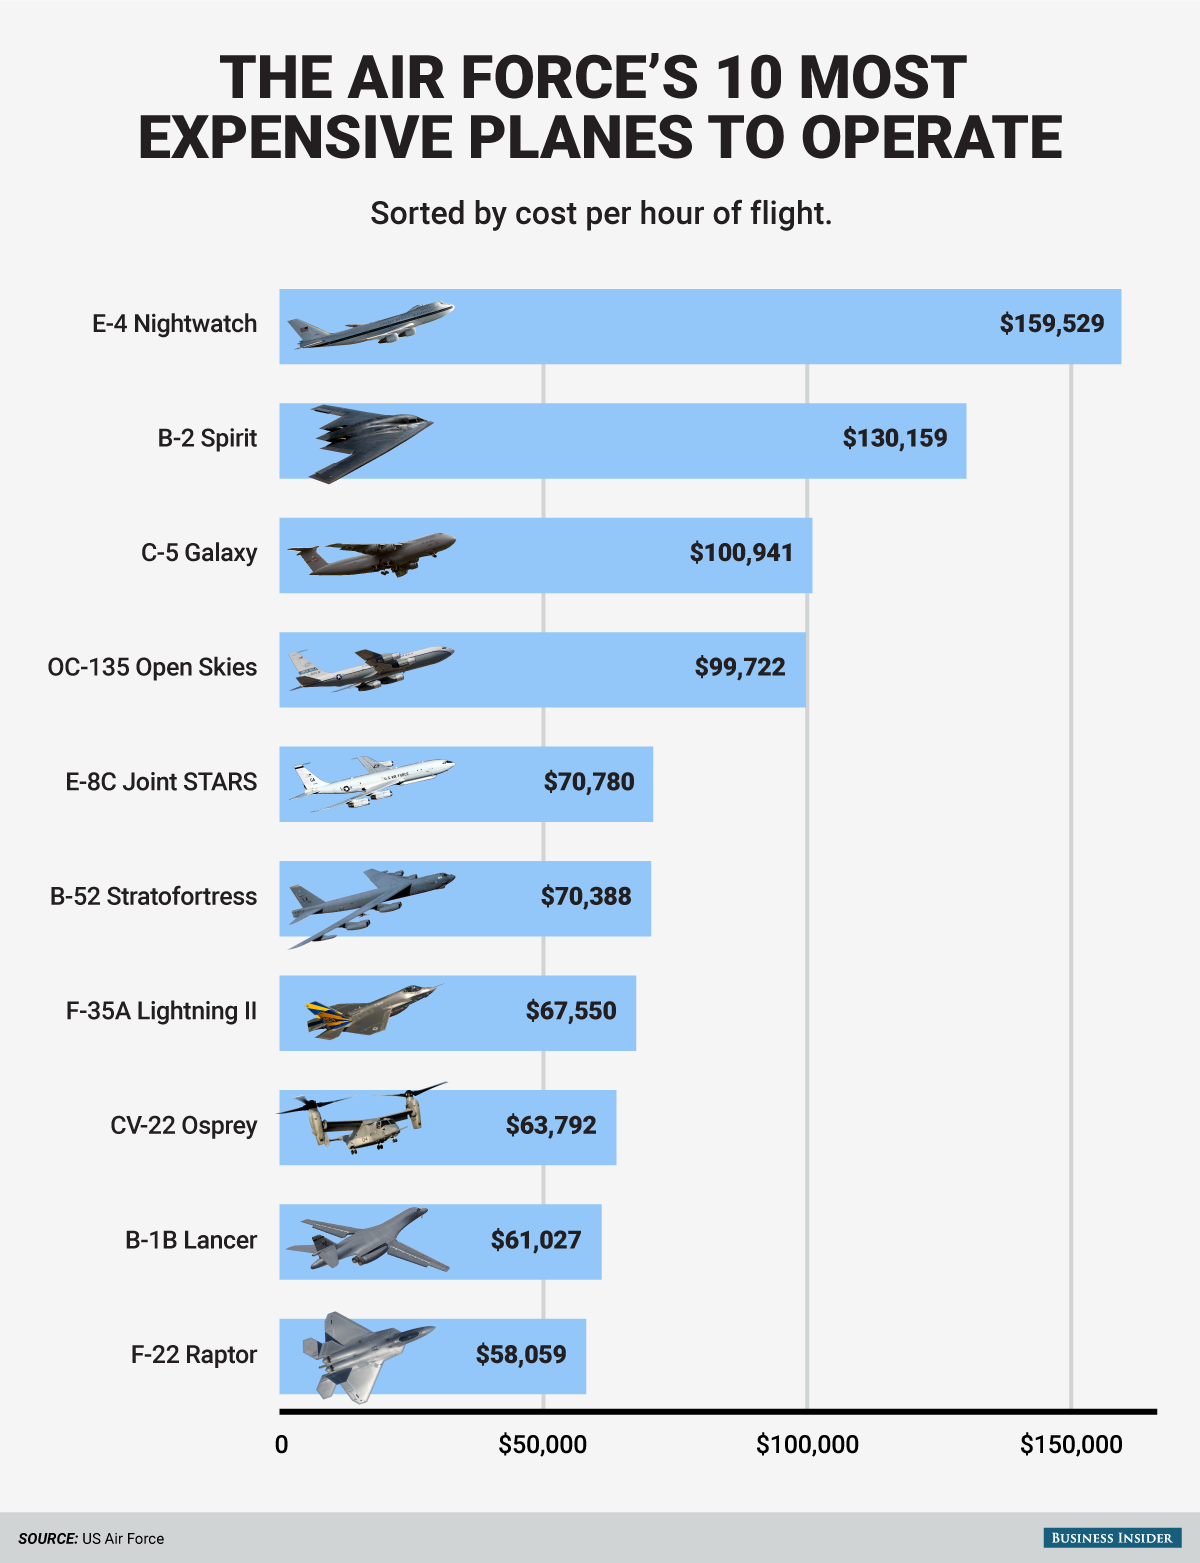 most-expensive-planes-to-operate-in-the-us-air-force